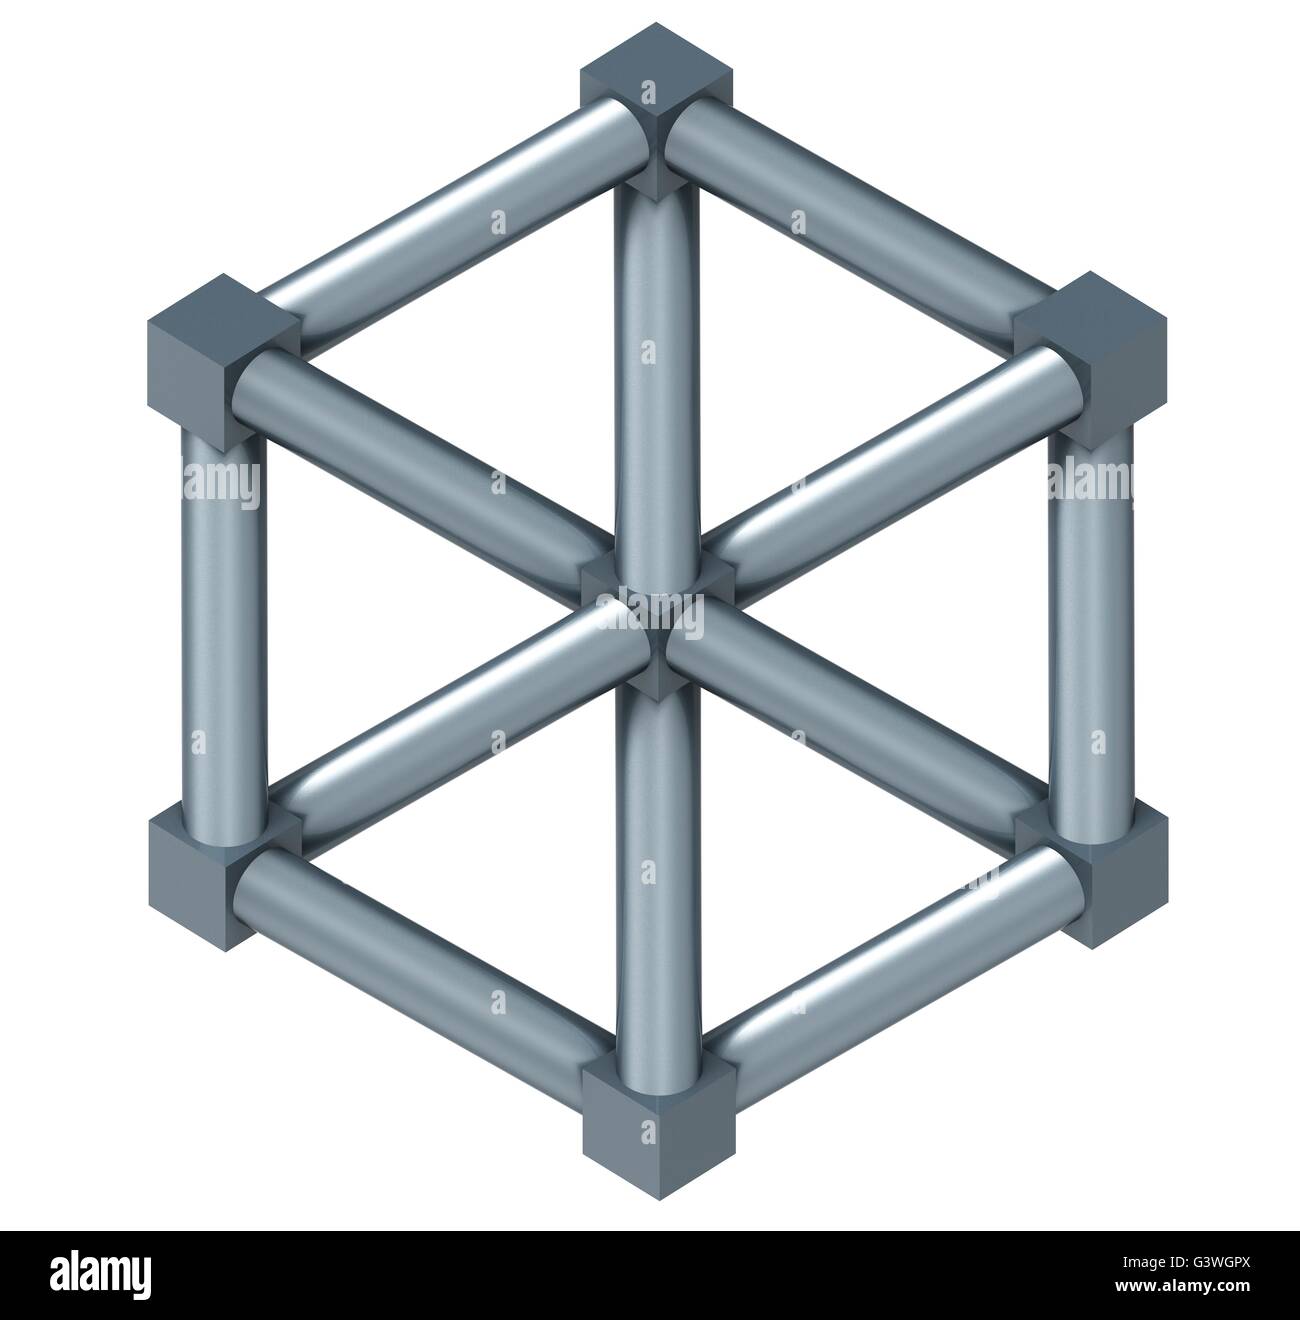 The Escher Cube isolated on a white background. Stock Photo